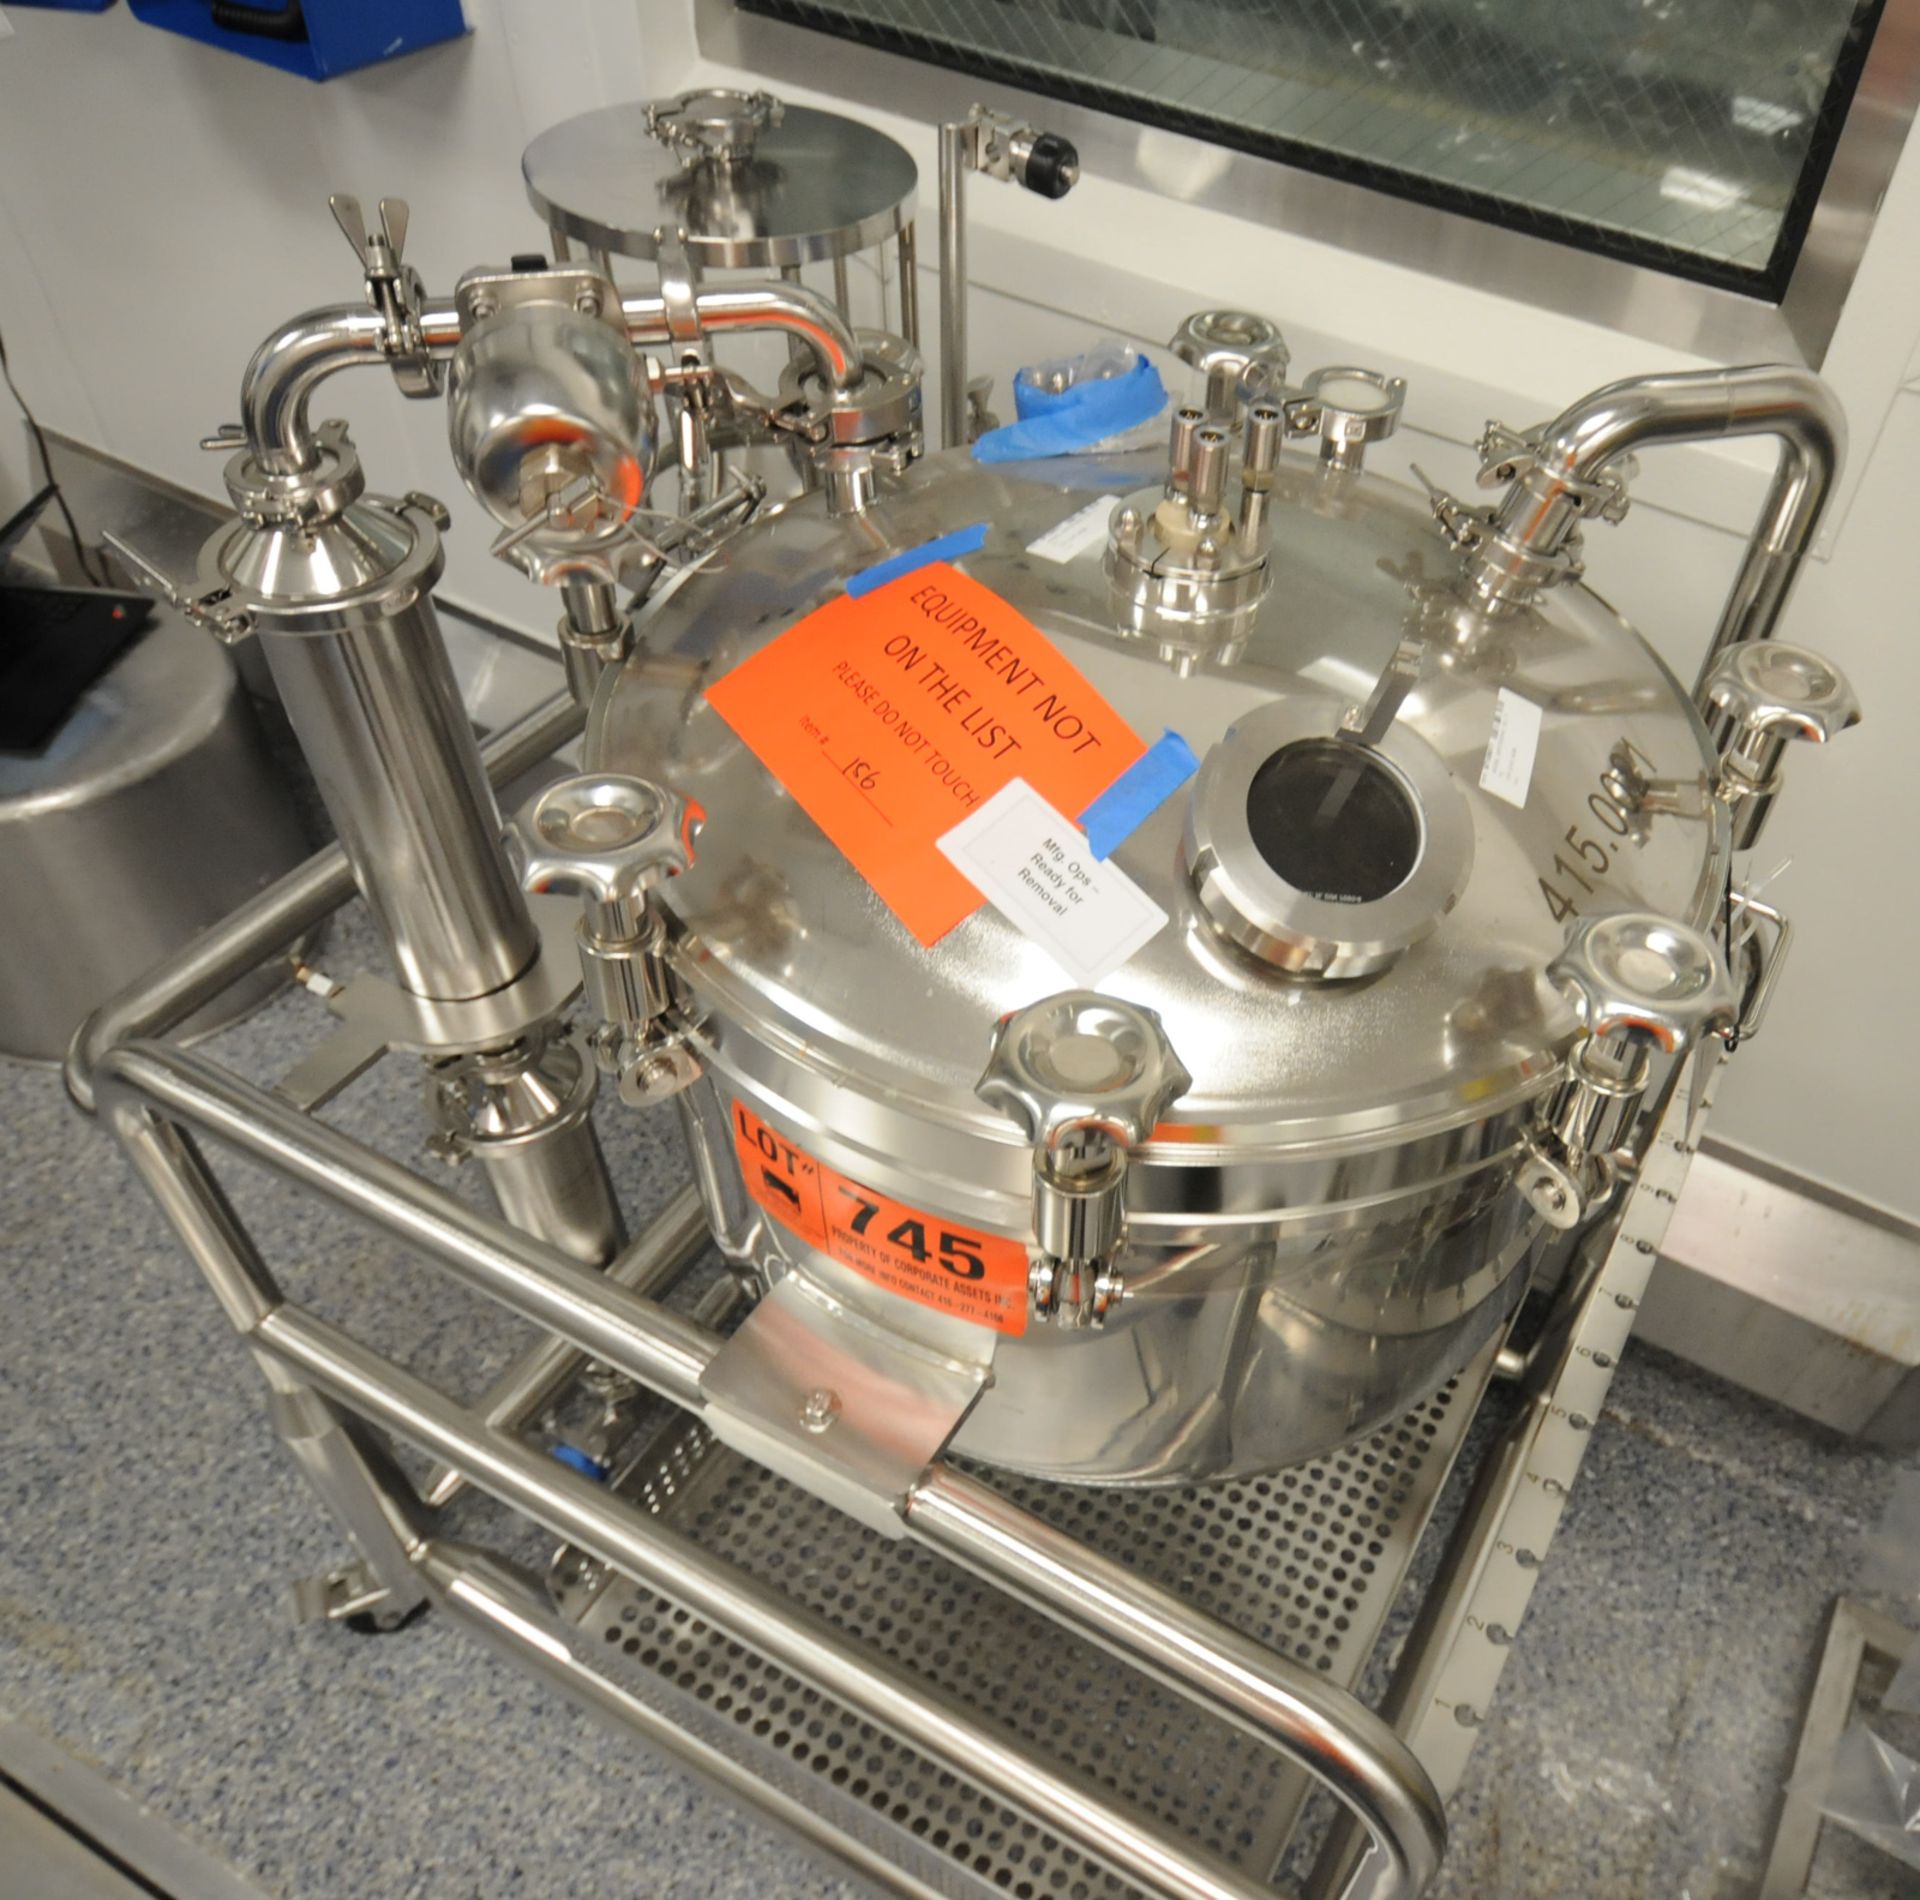 SOMMER & STRASSBURGER (2013) RAUM/CHAMBER STAINLESS STEEL CART MOUNTED PORTABLE REACTOR VESSEL - Image 2 of 6